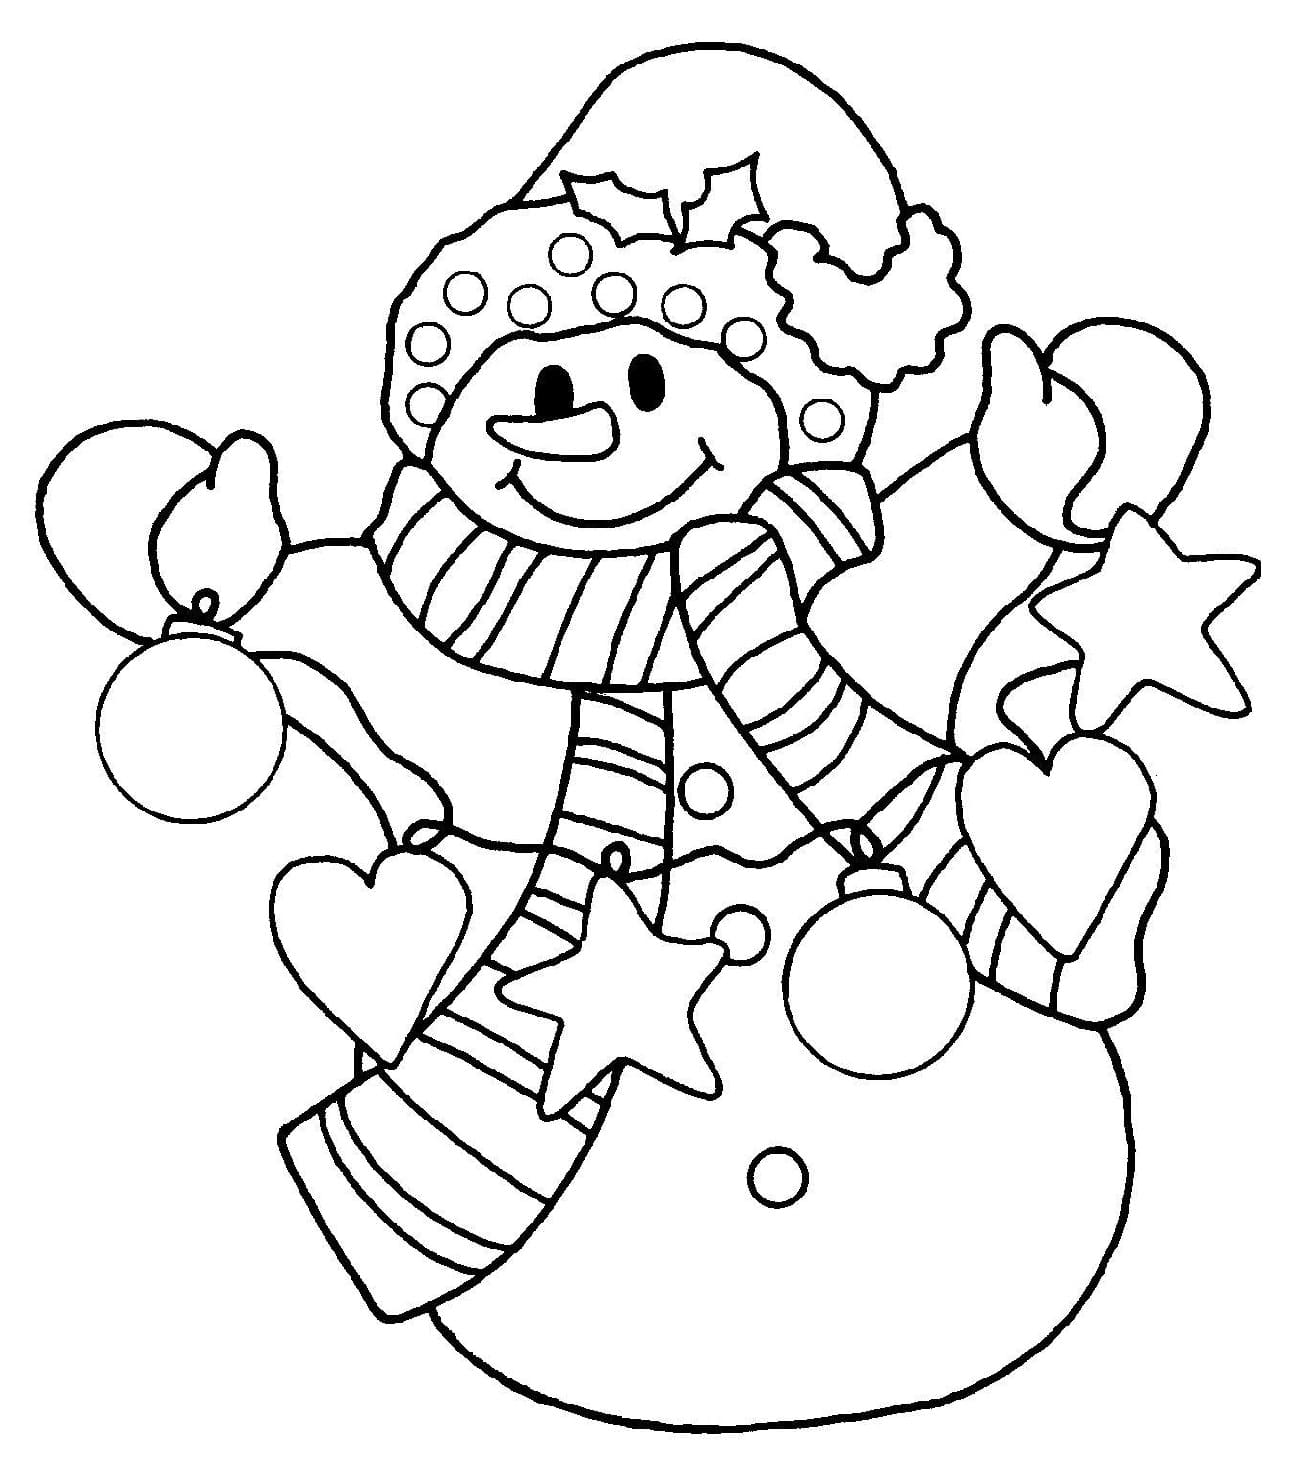 Snowman With A Luminous Garland Coloring Page